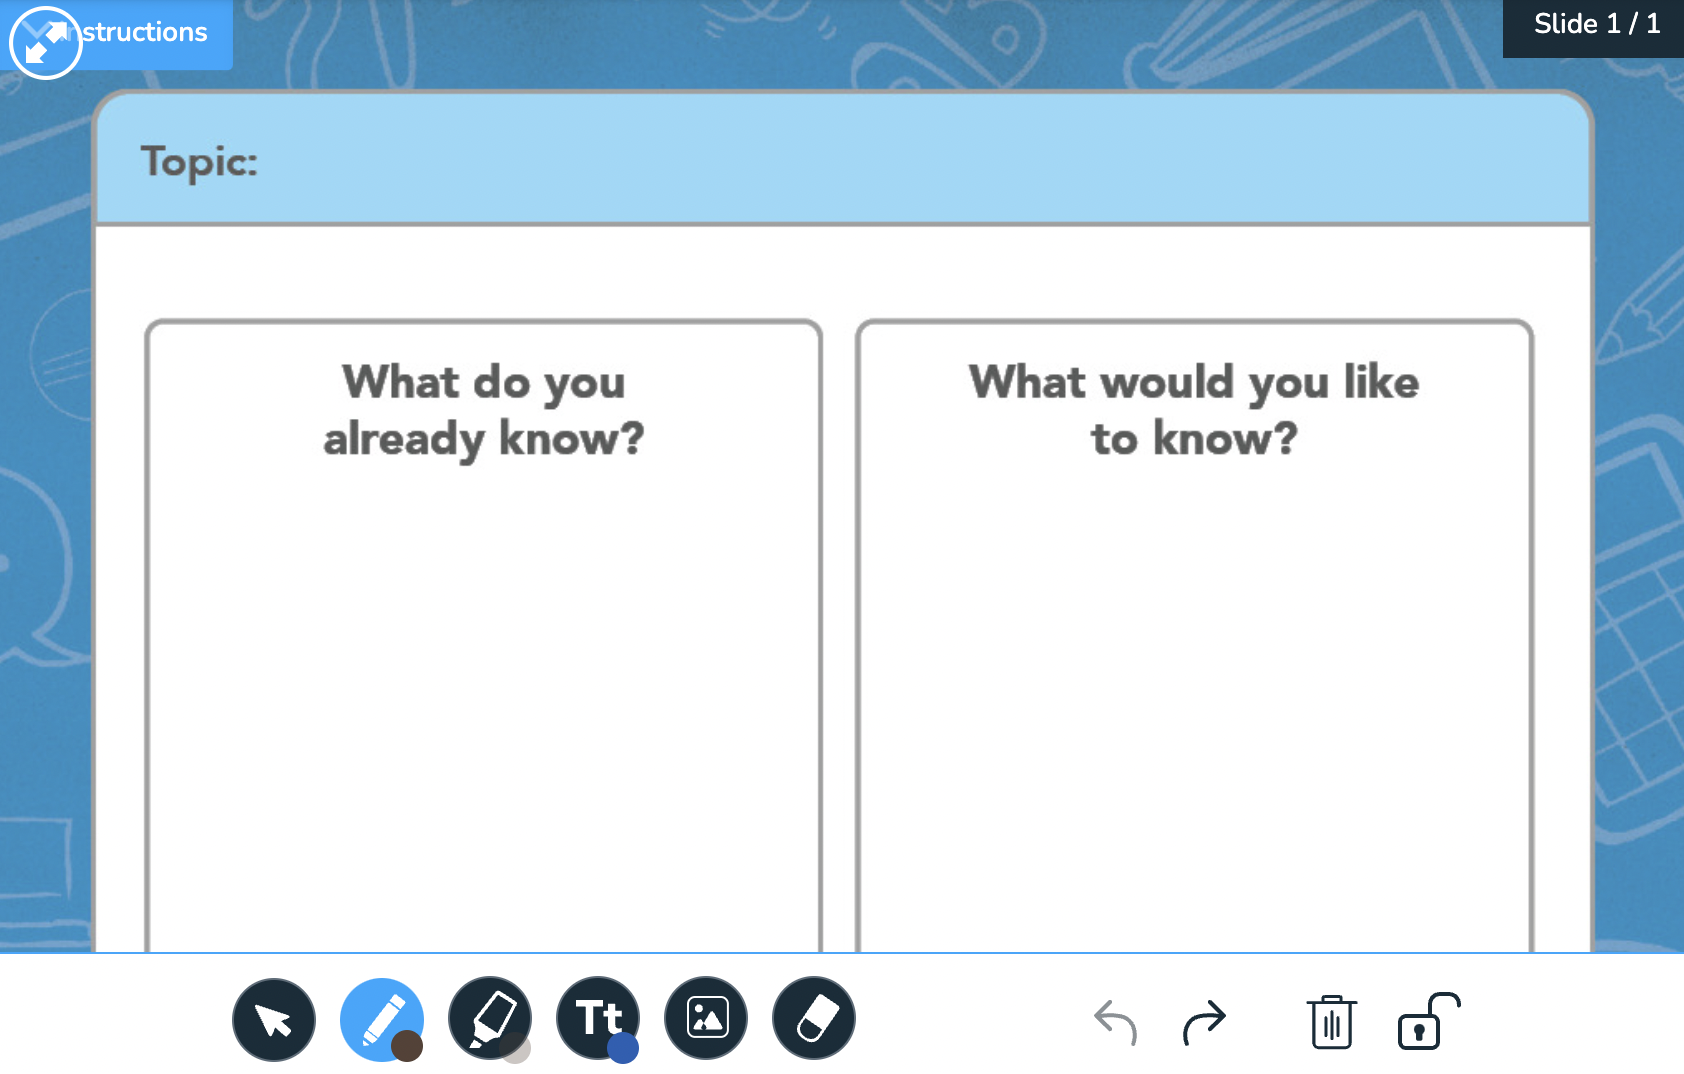 How to use drawing as a formative assessment tool - Nearpod Blog